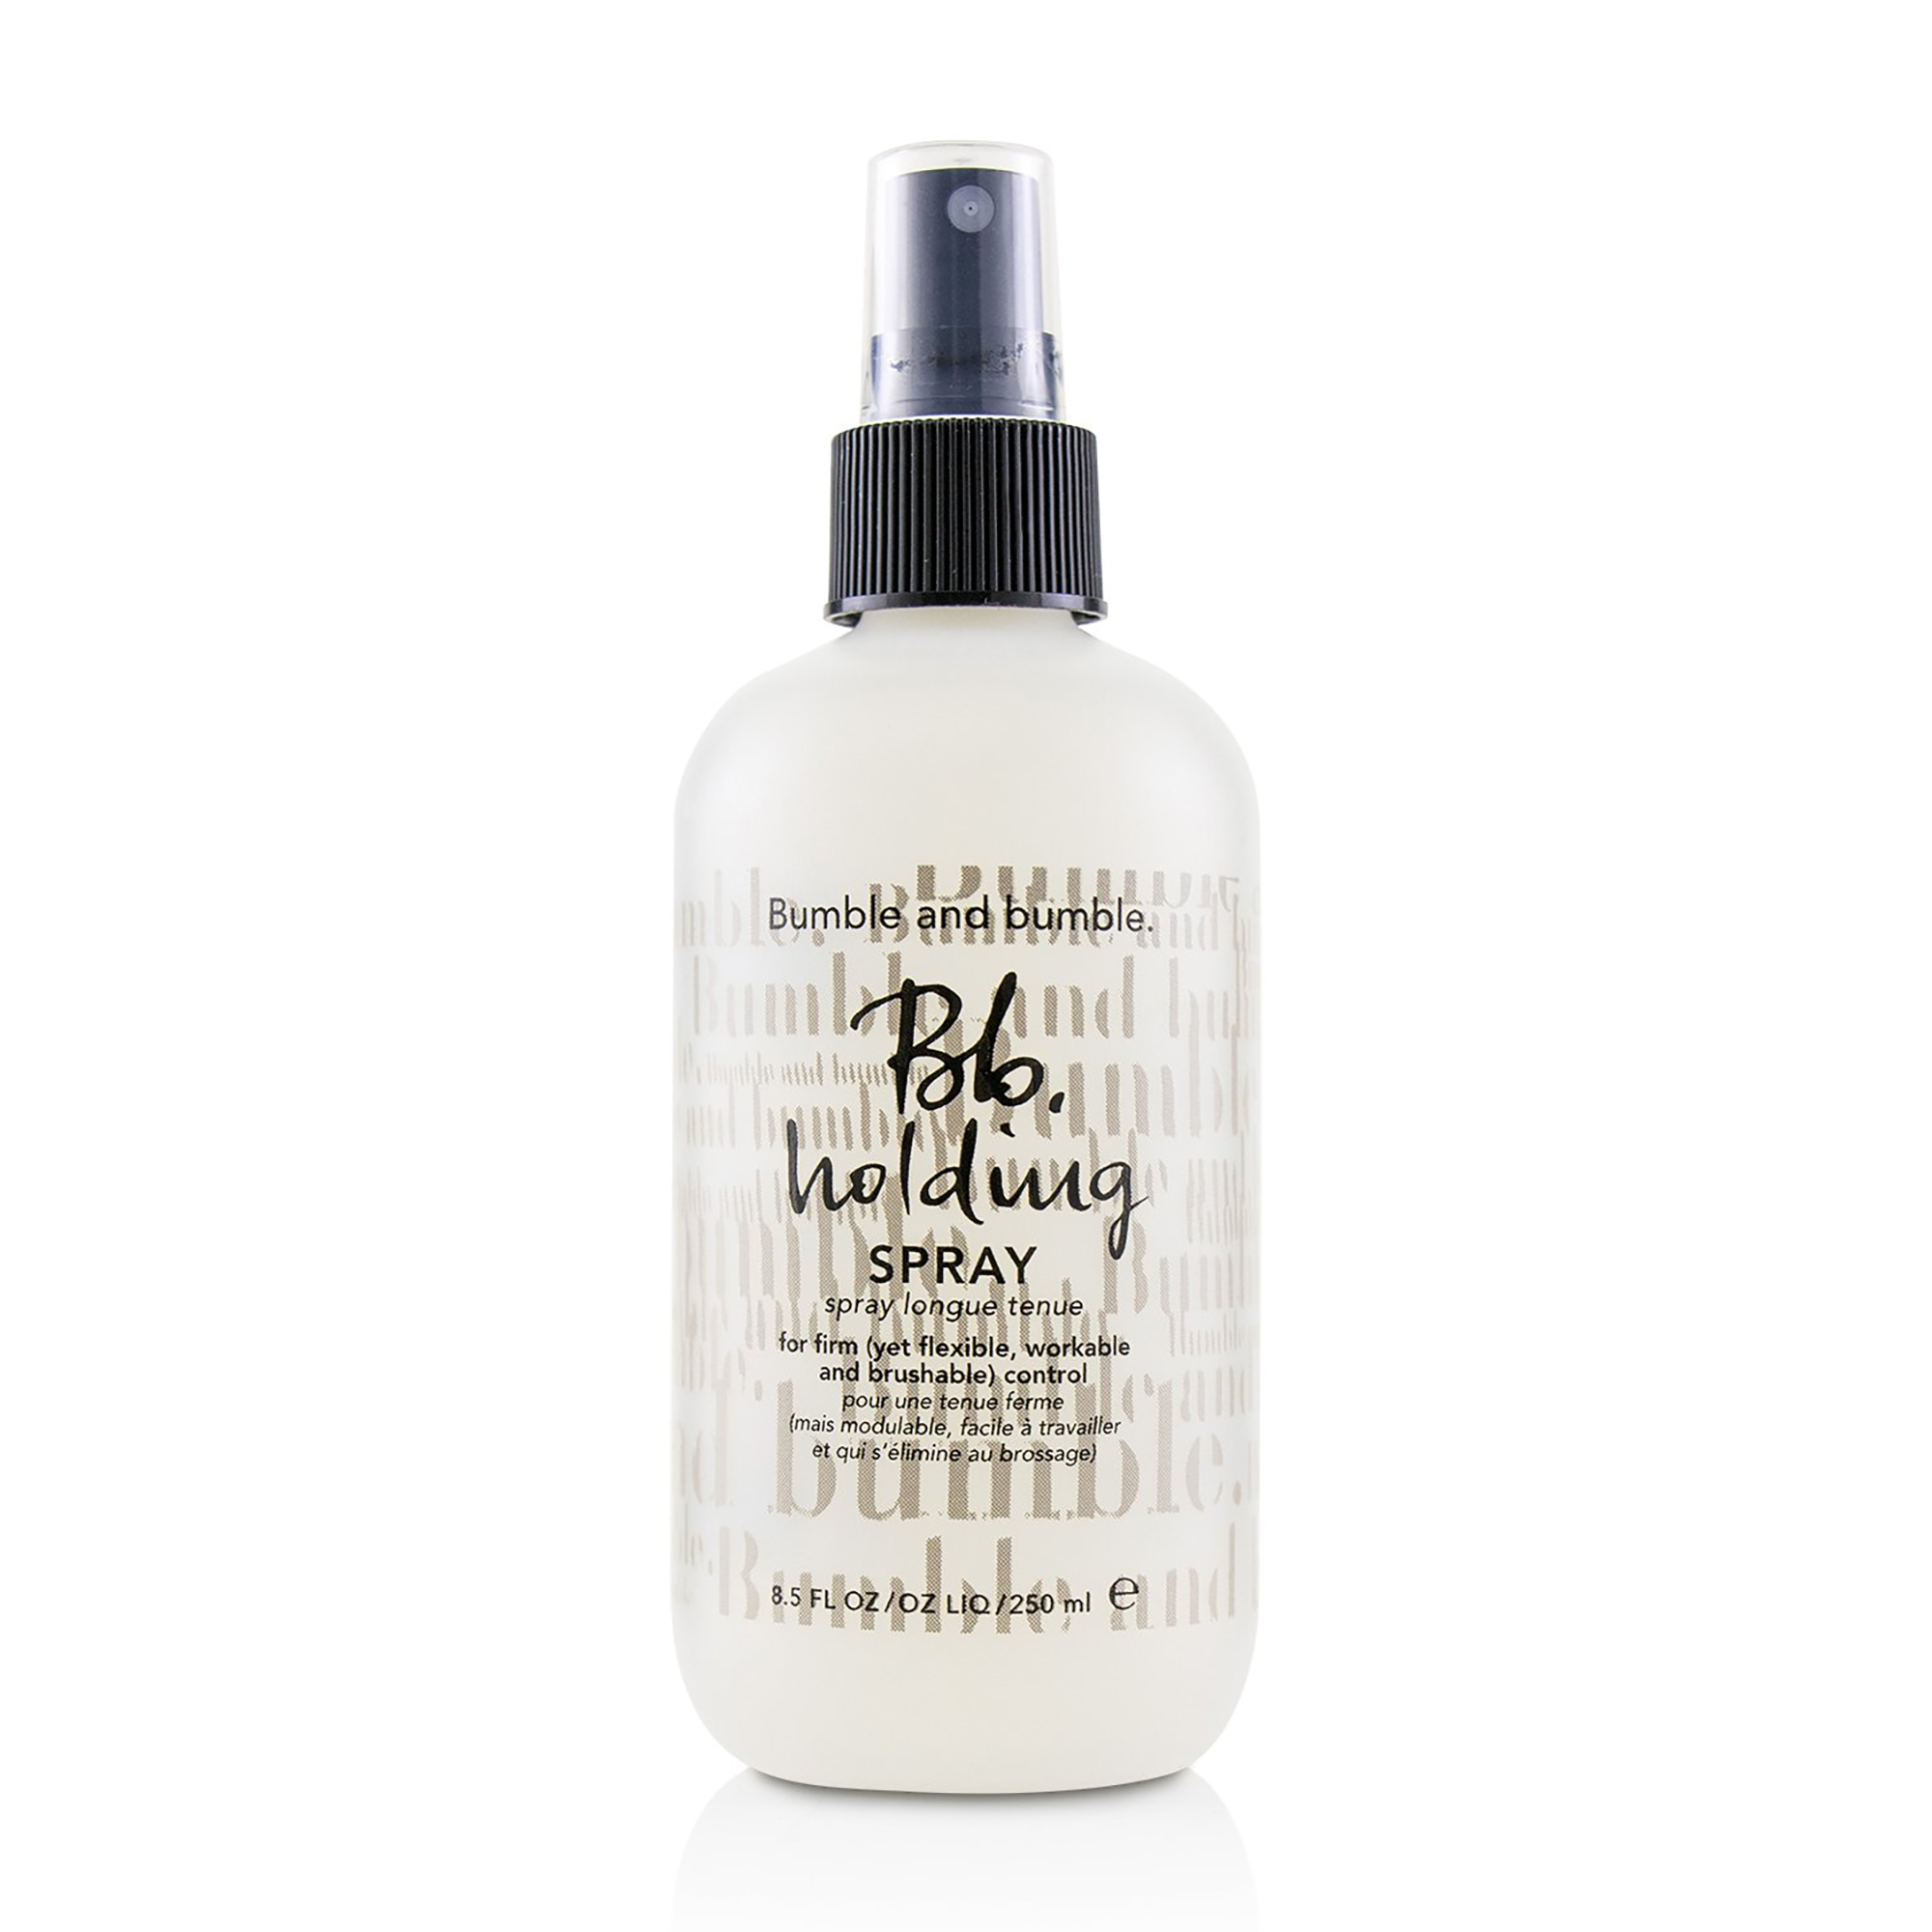 Bumble and bumble Holding Spray / 8OZ